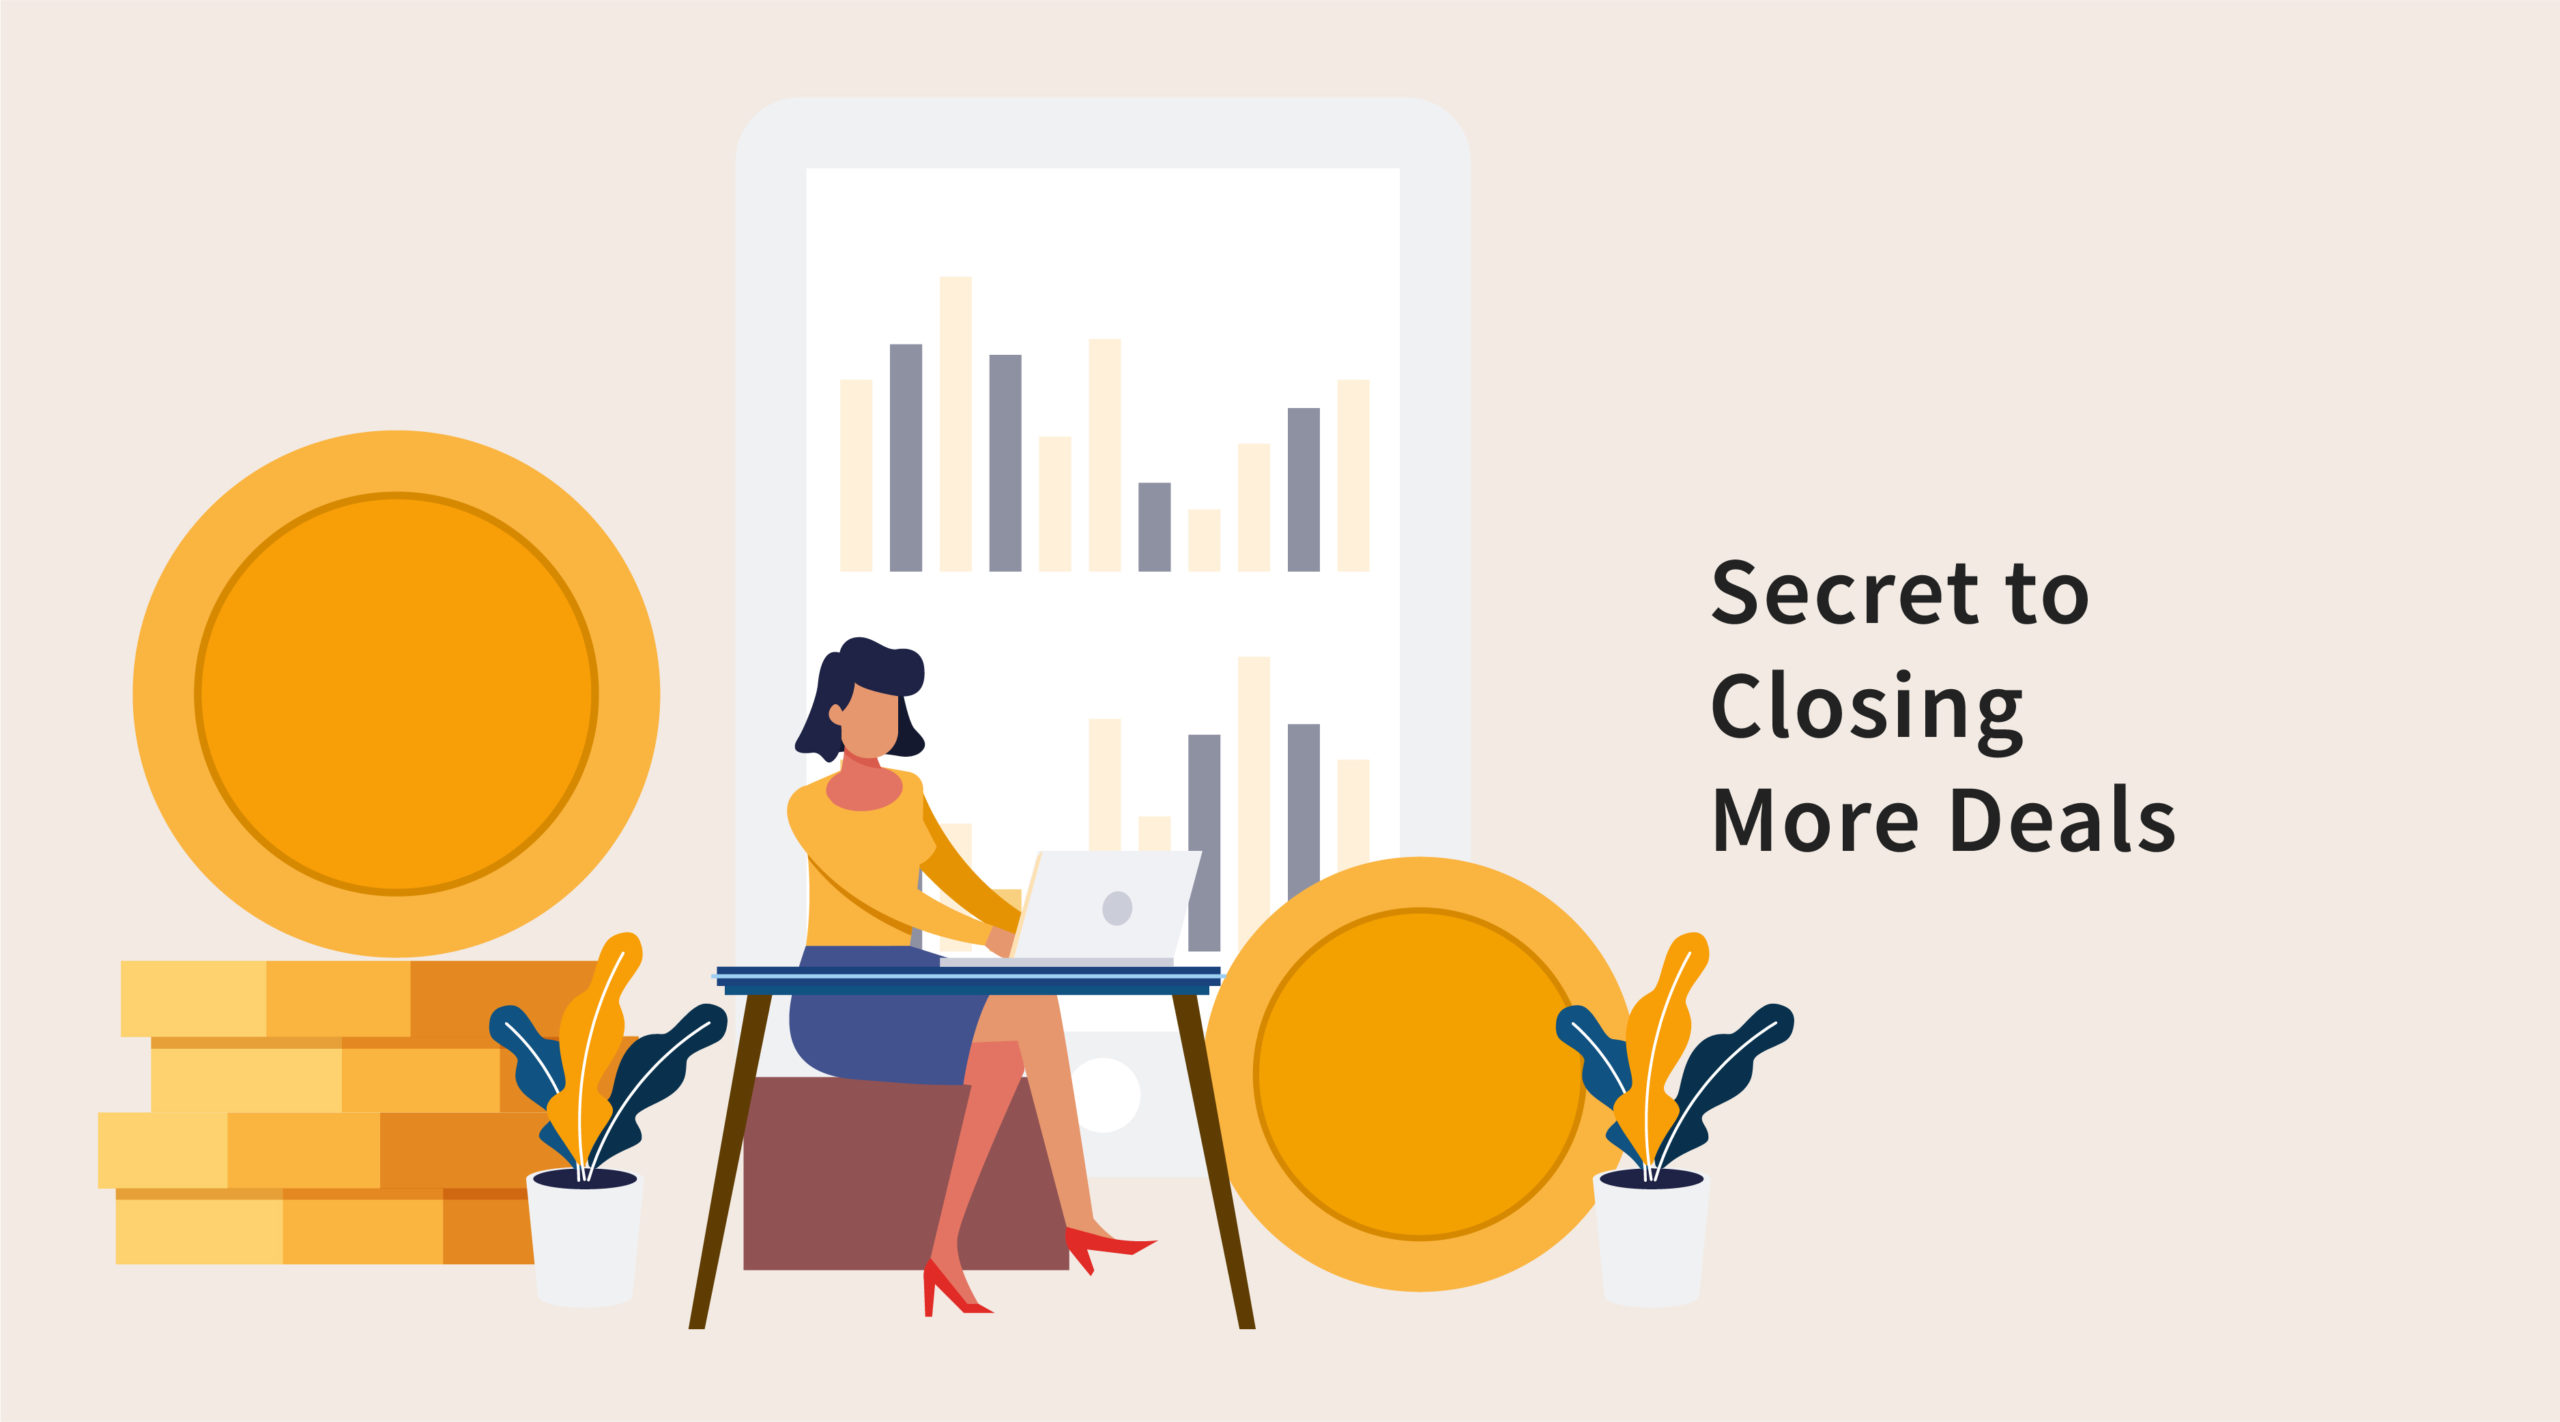 Personality decoded: Secret to Closing More Deals